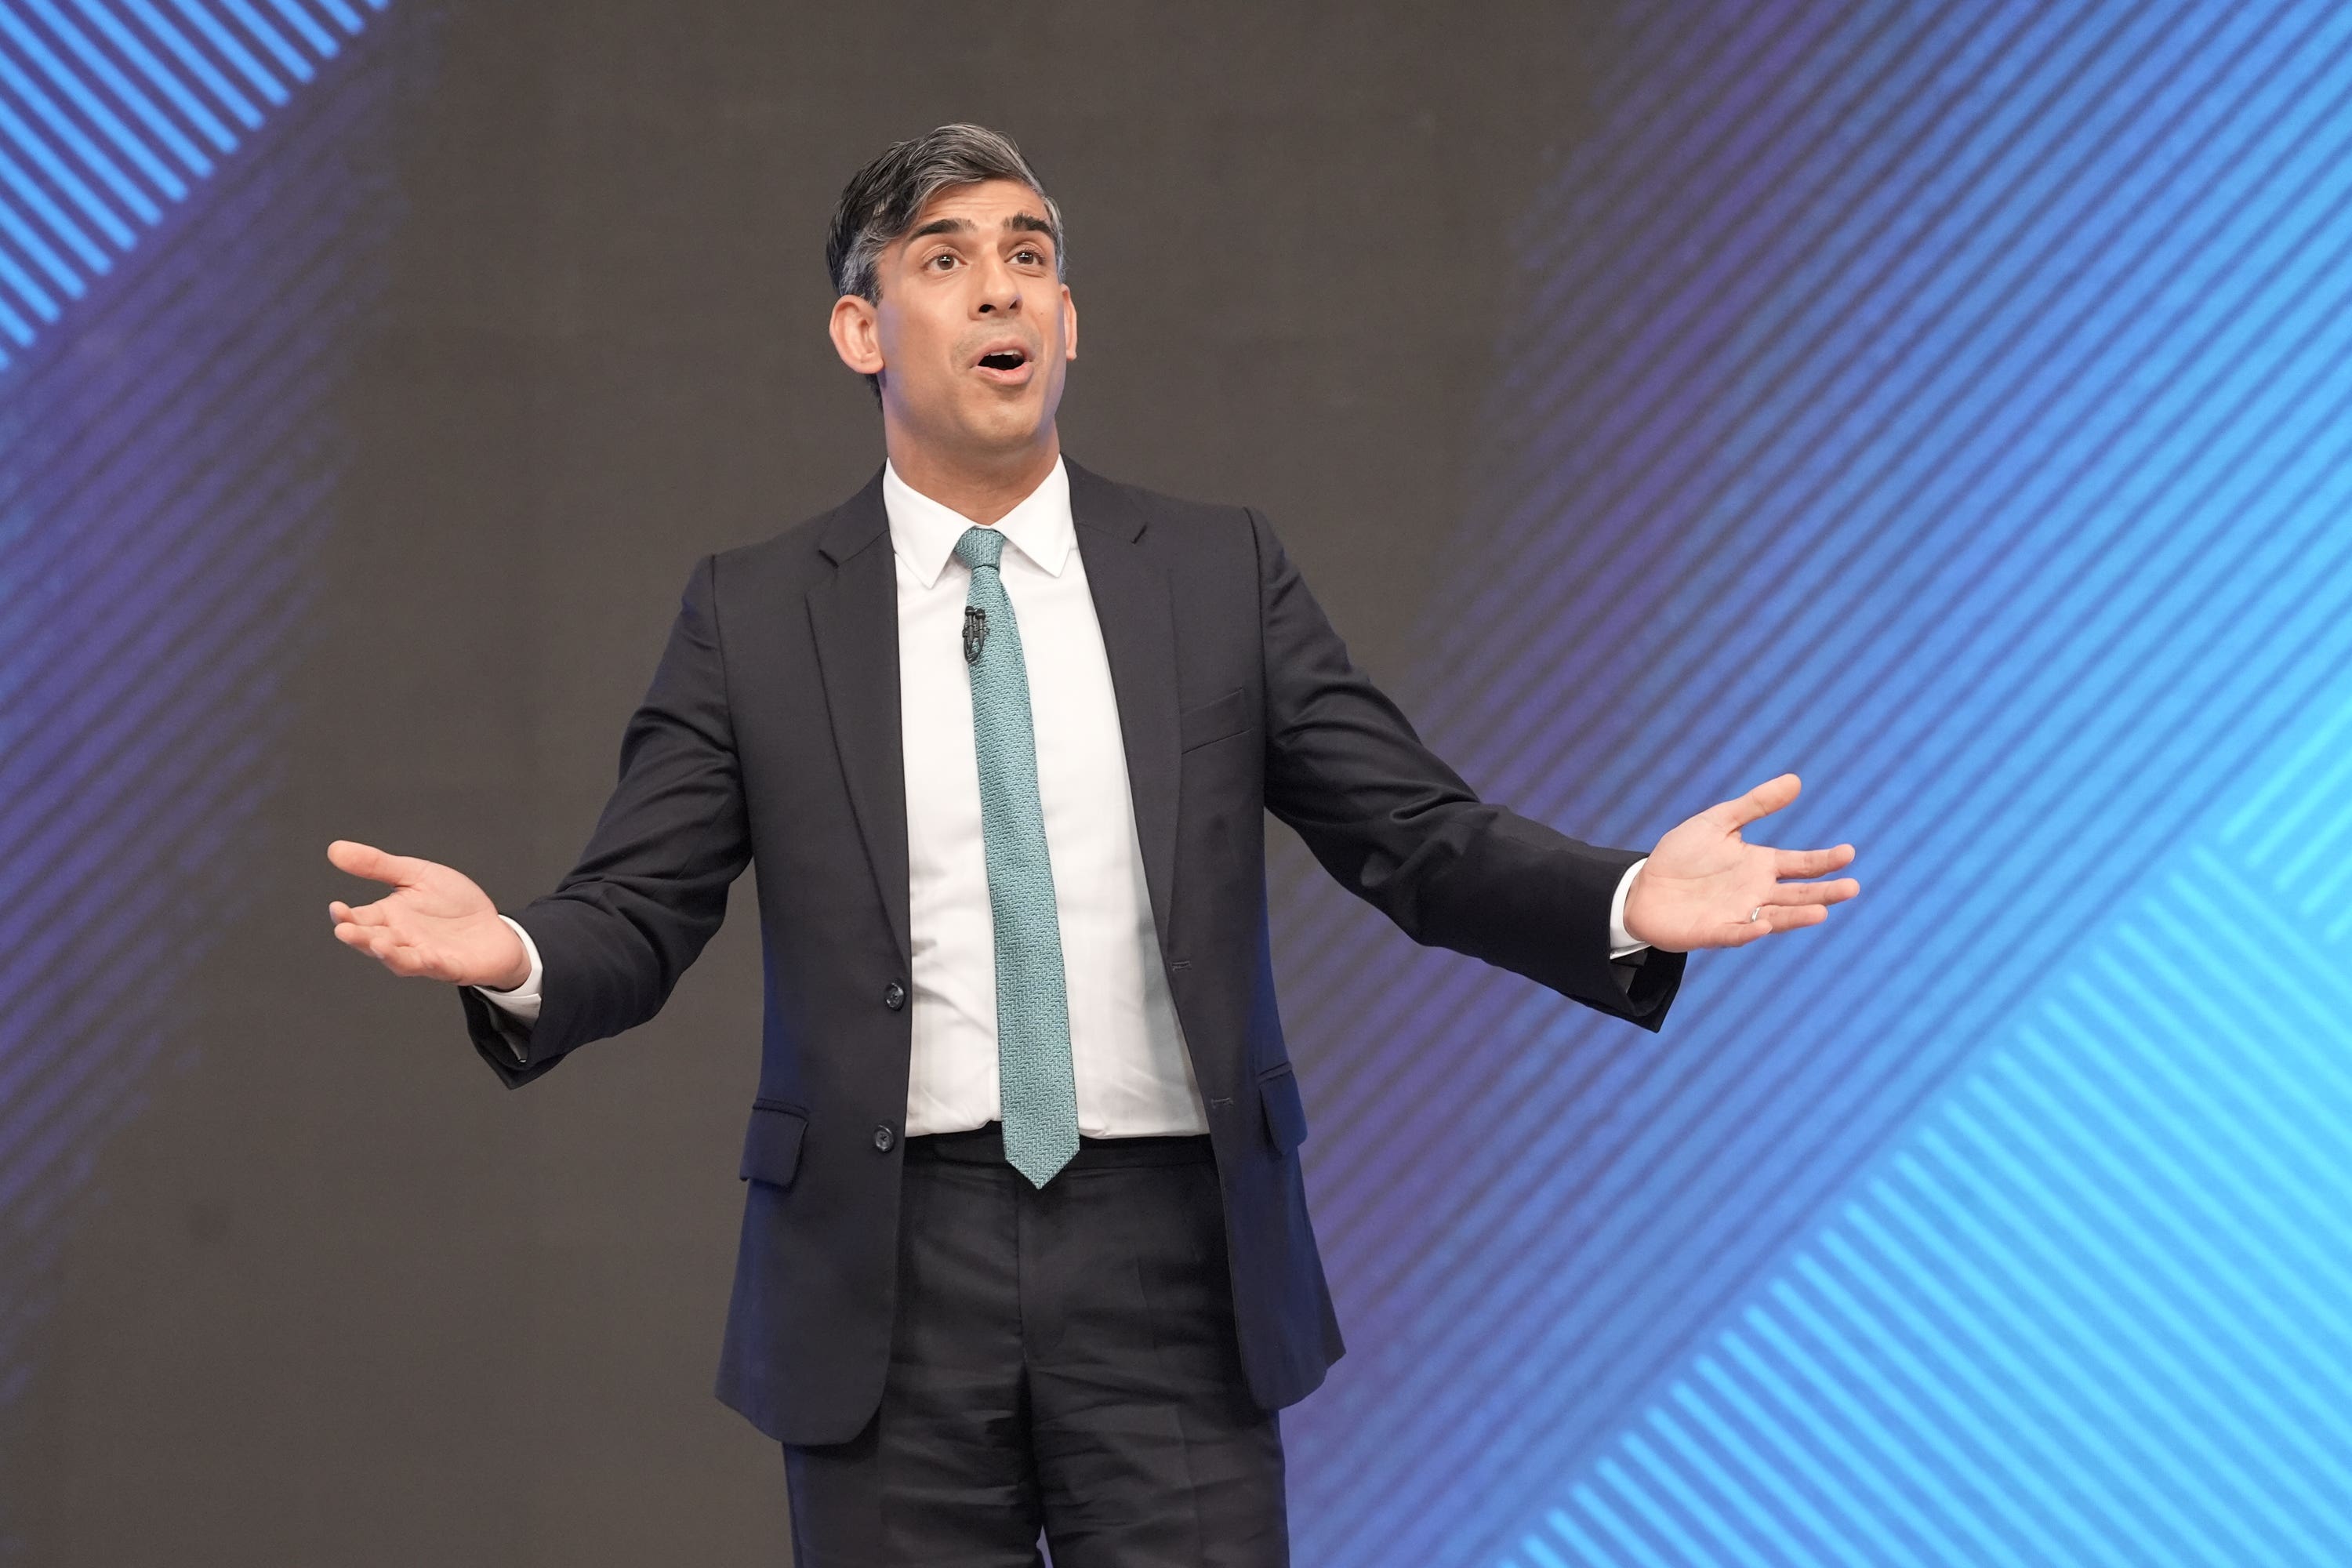 Rishi Sunak has put tax cuts at the heart of his pitch to the country, but a poll suggests more voters want to see spending on public services